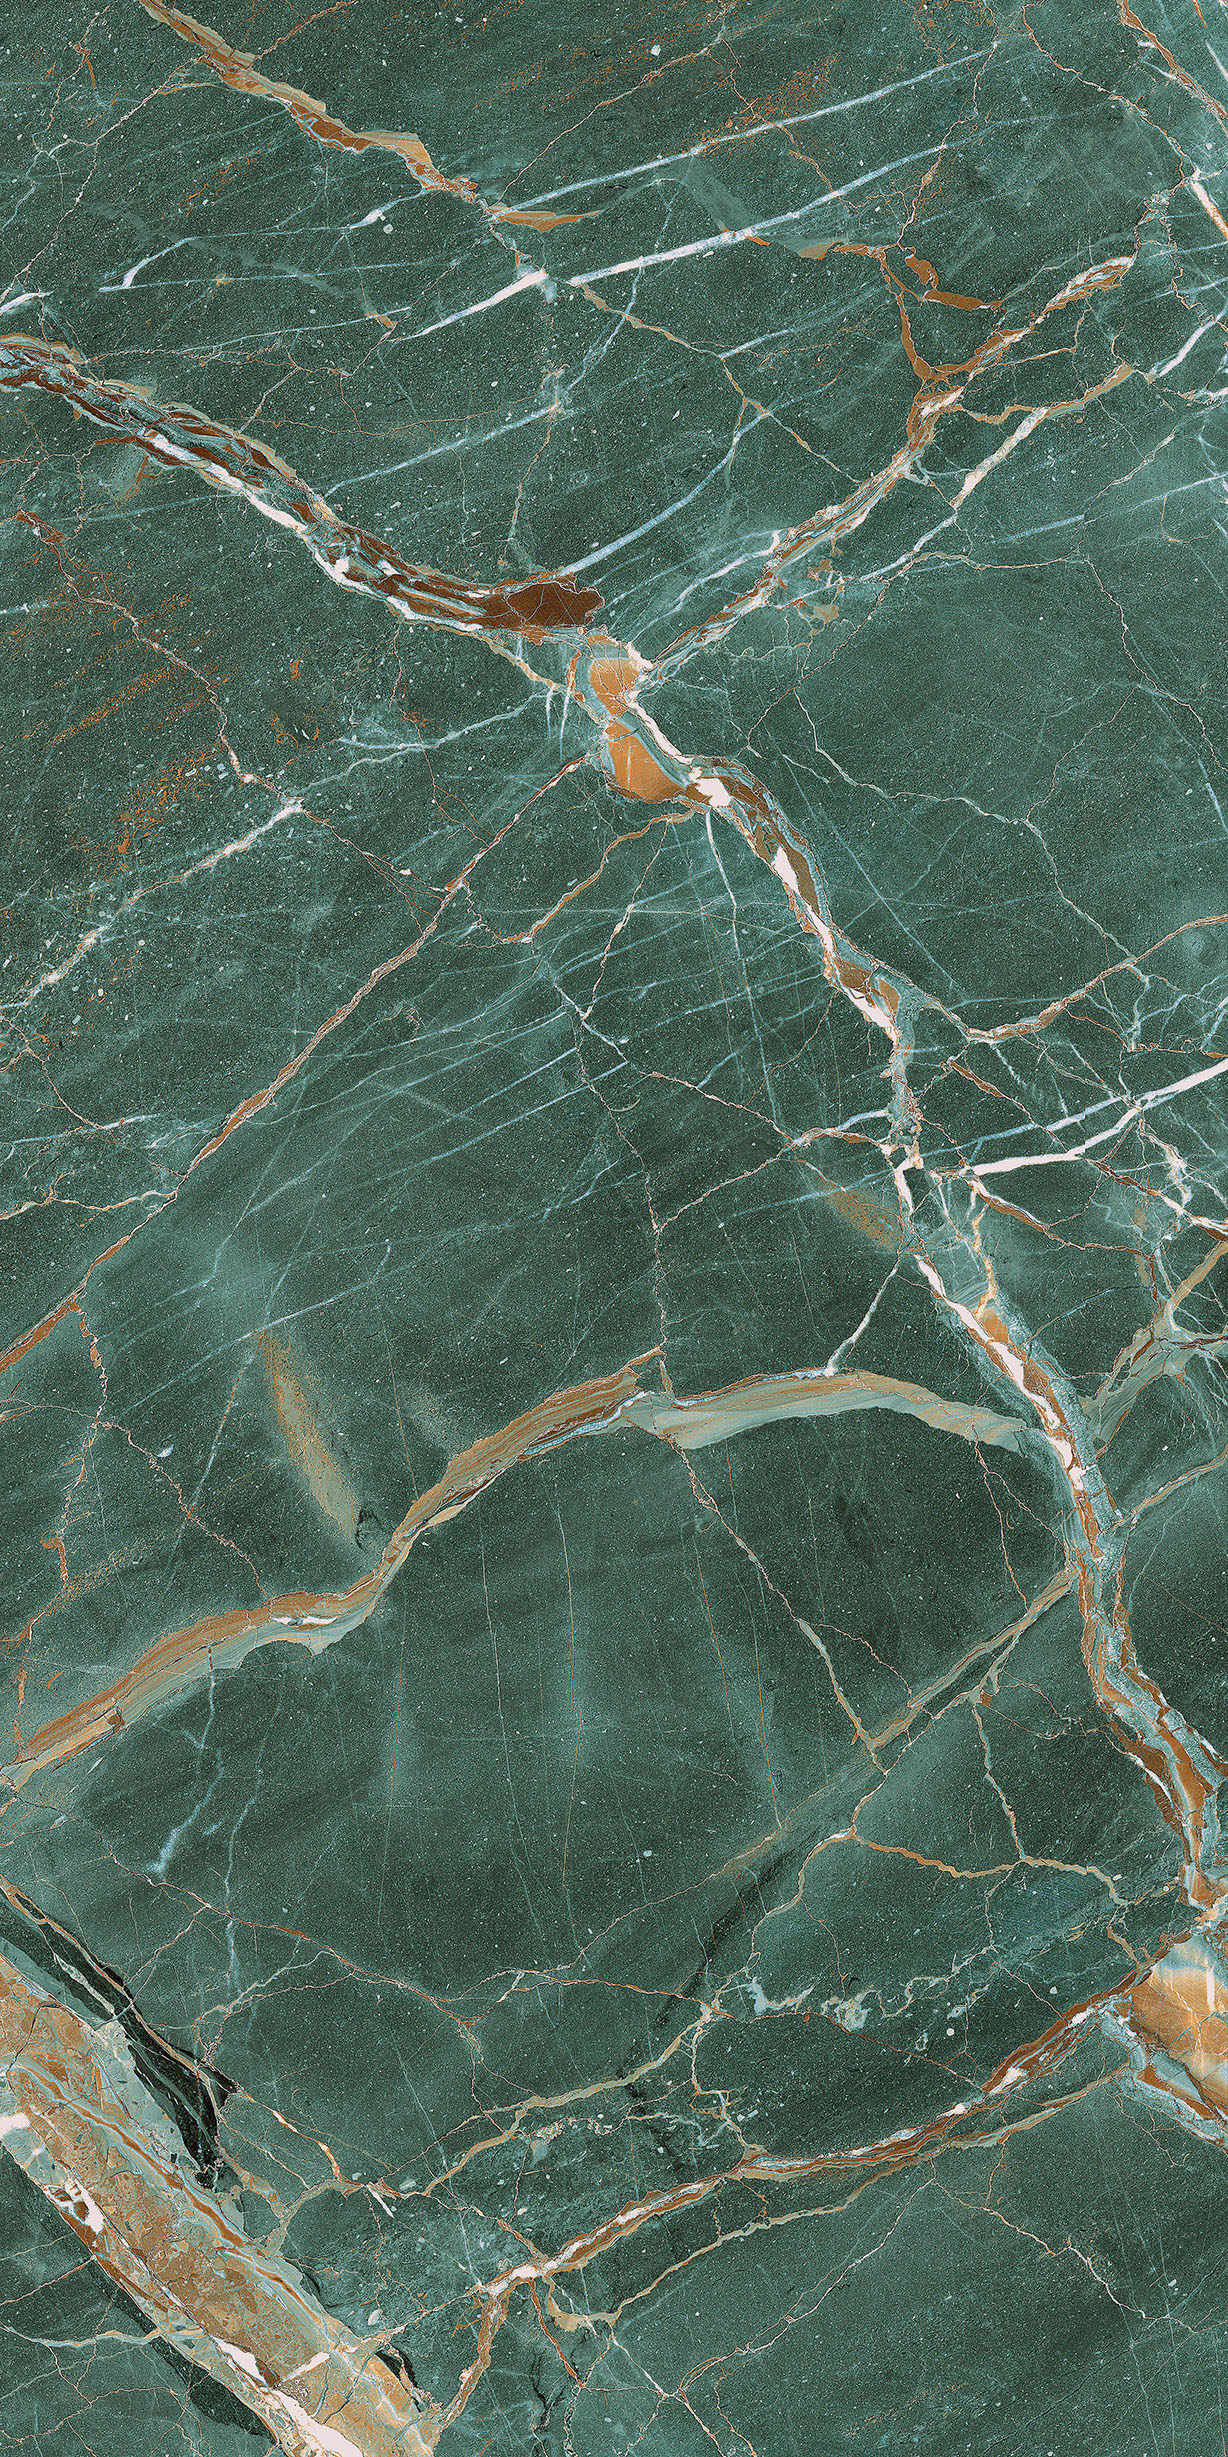 Marble Texture Background, ; Shutterstock ID 1786565438; Purchase Order: -